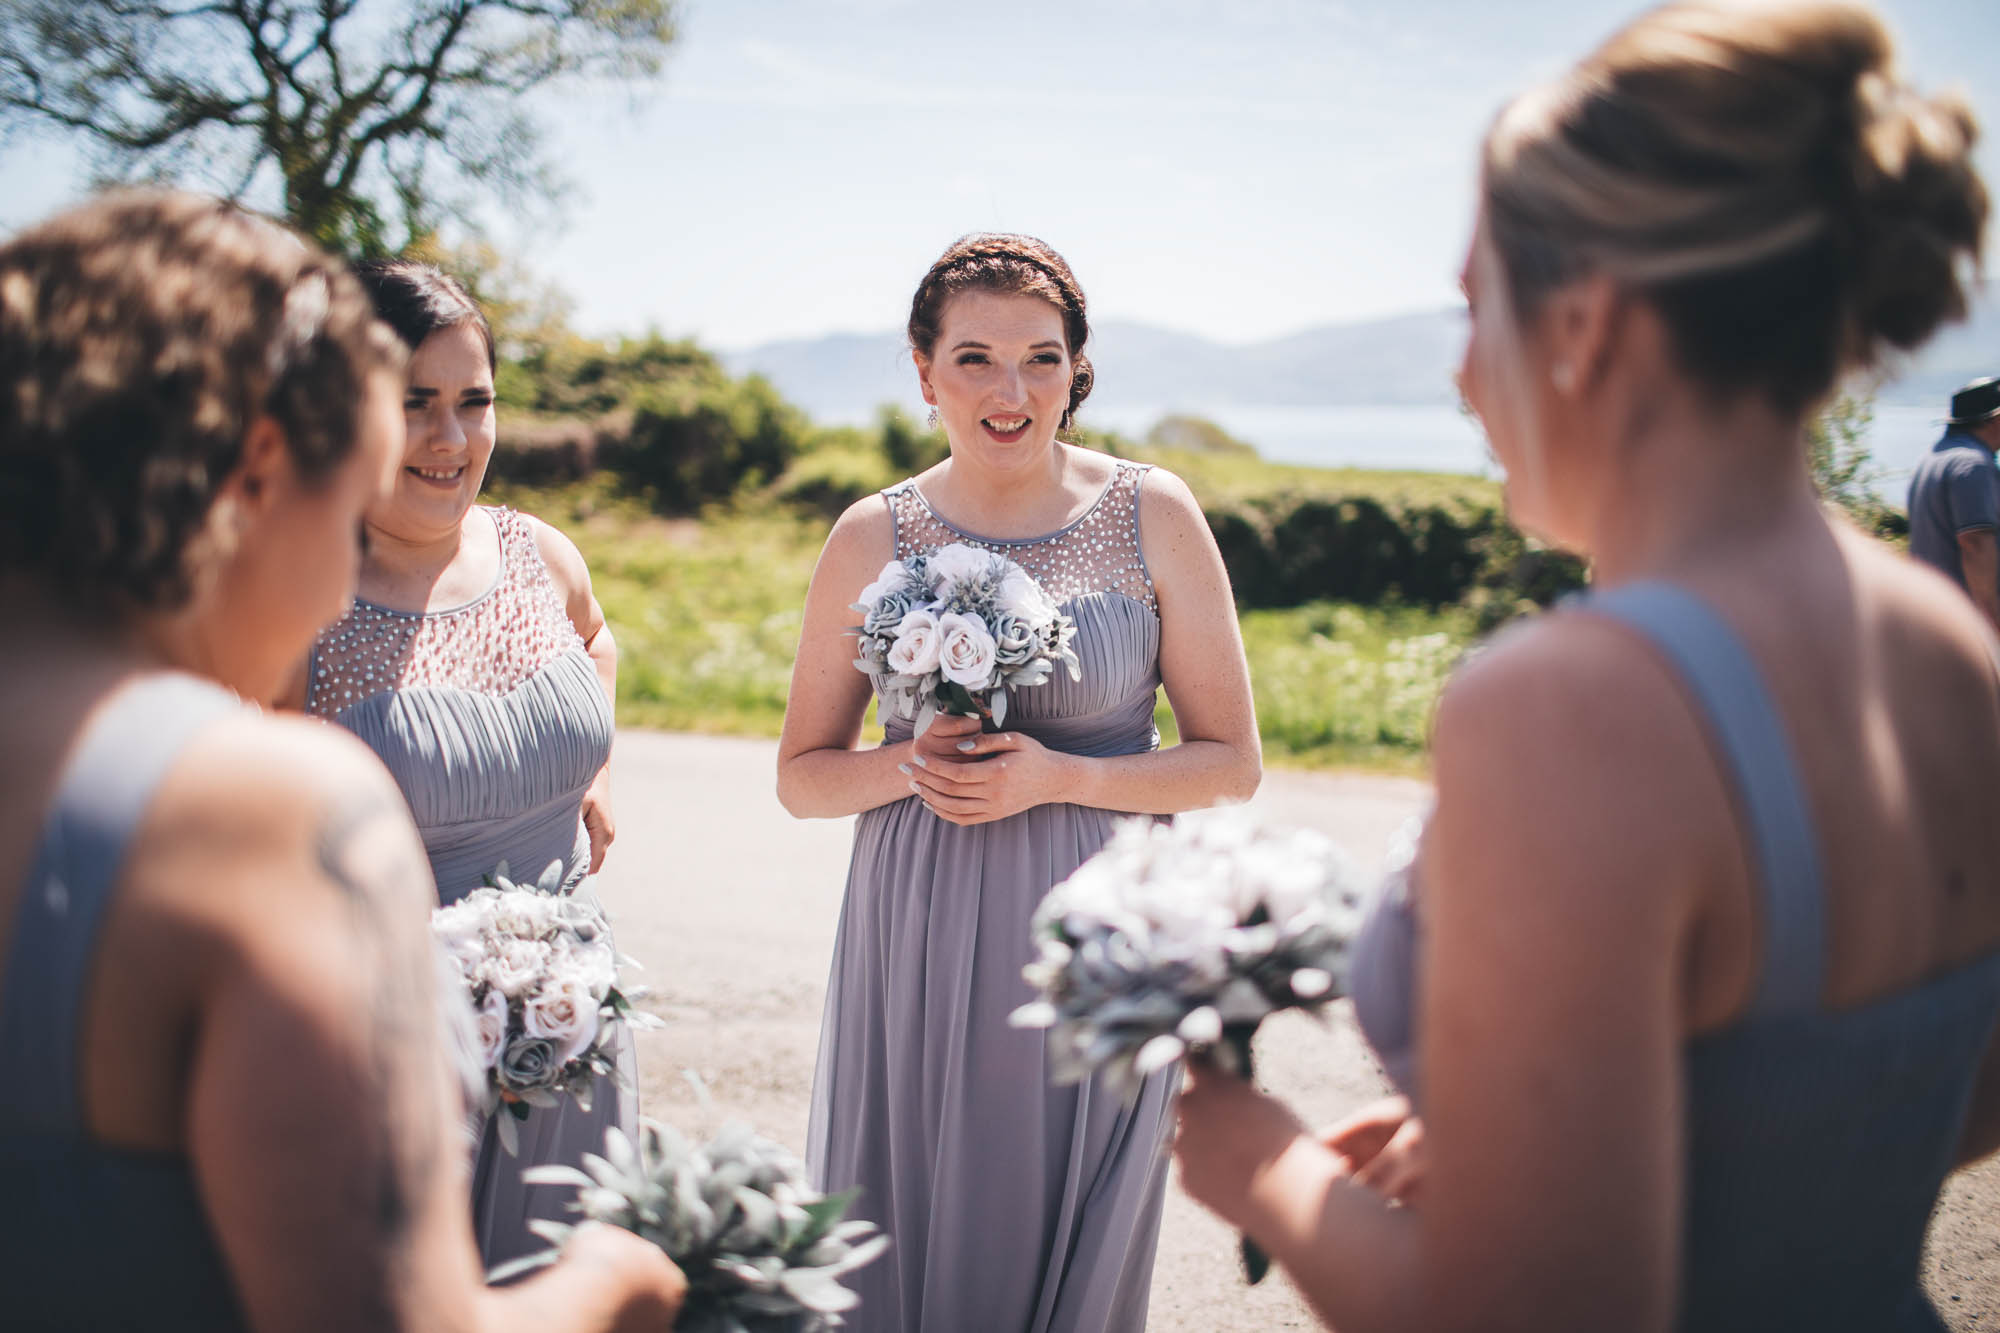 Bridesmaids wait in anticipation for Bride to arrive